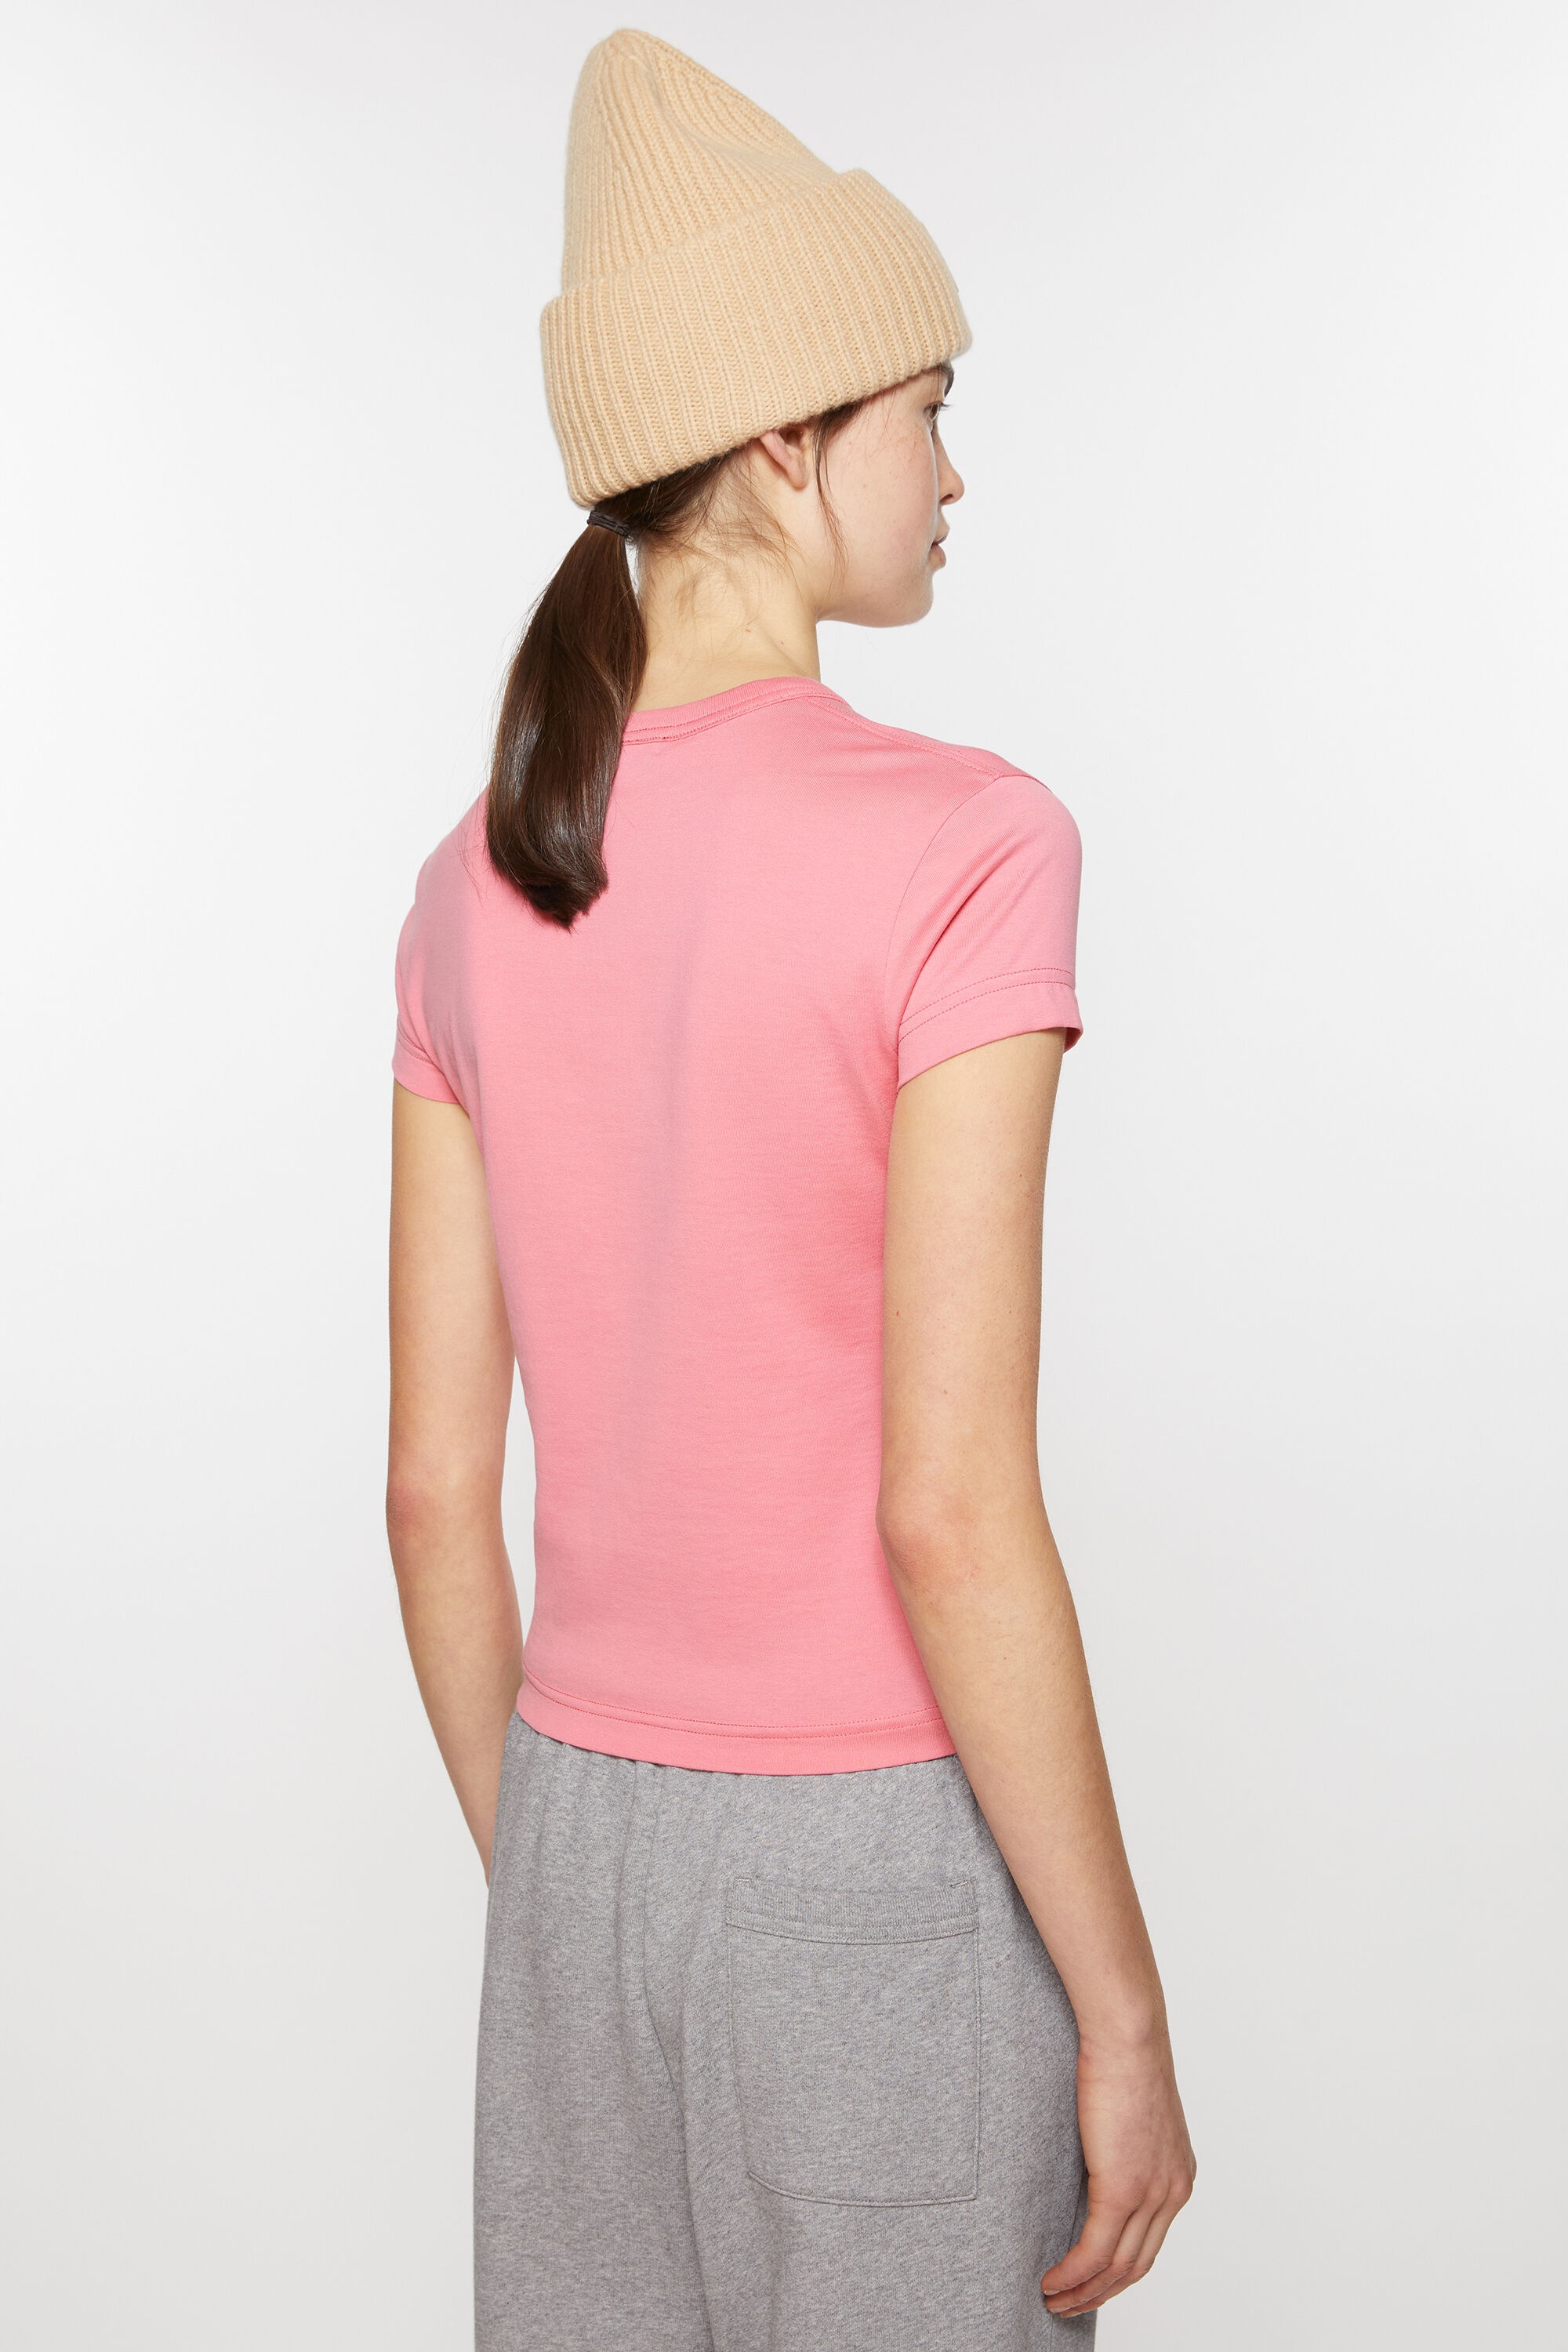 Crew neck t-shirt - Fitted fit - Tango pink - 3